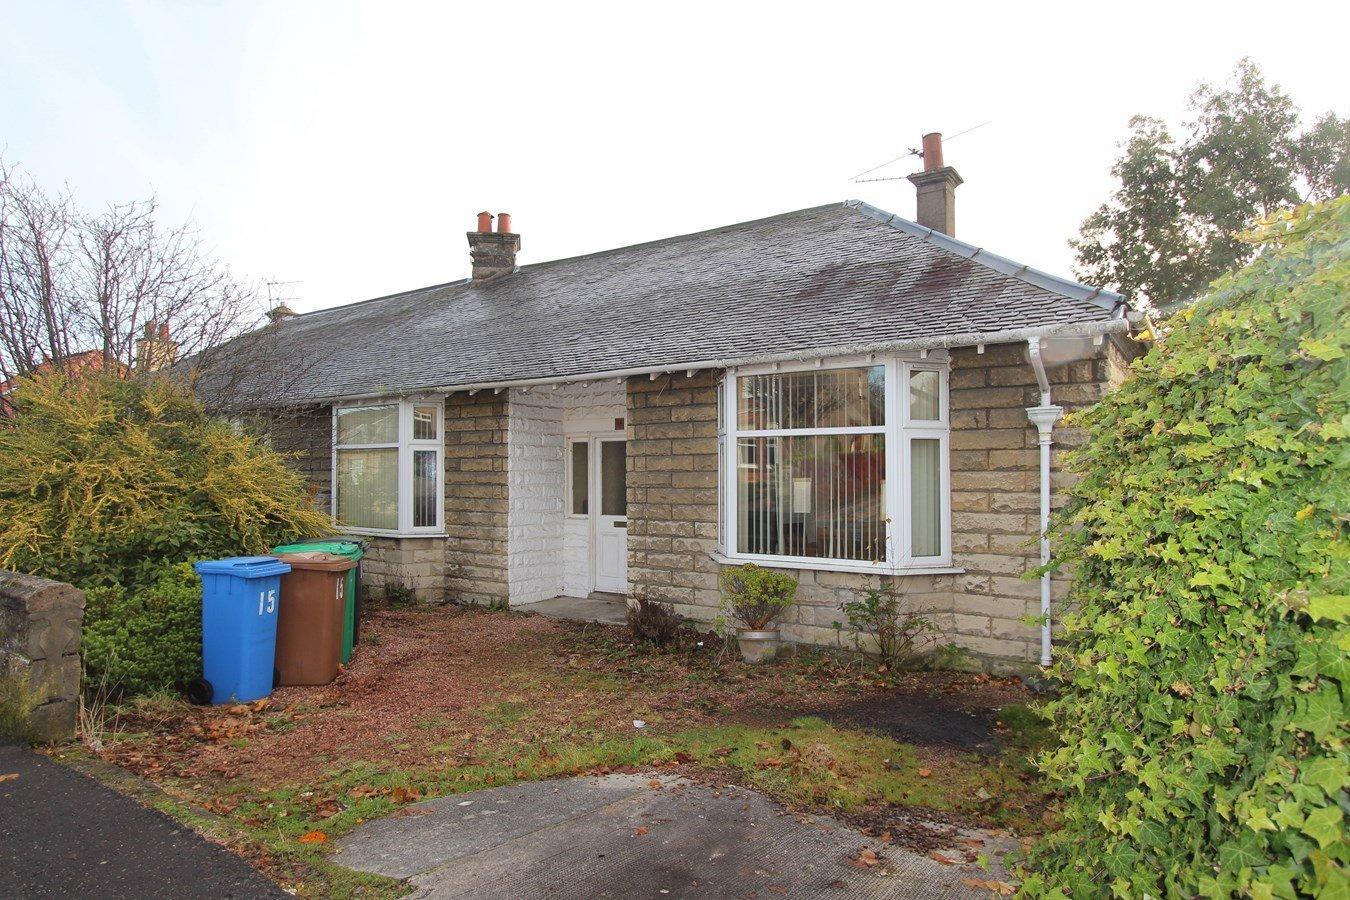 Offers over £148,500. More details at https://www.zoopla.co.uk/for-sale/details/53345042?search_identifier=f7098bd597c50a7eab406325db460d5f